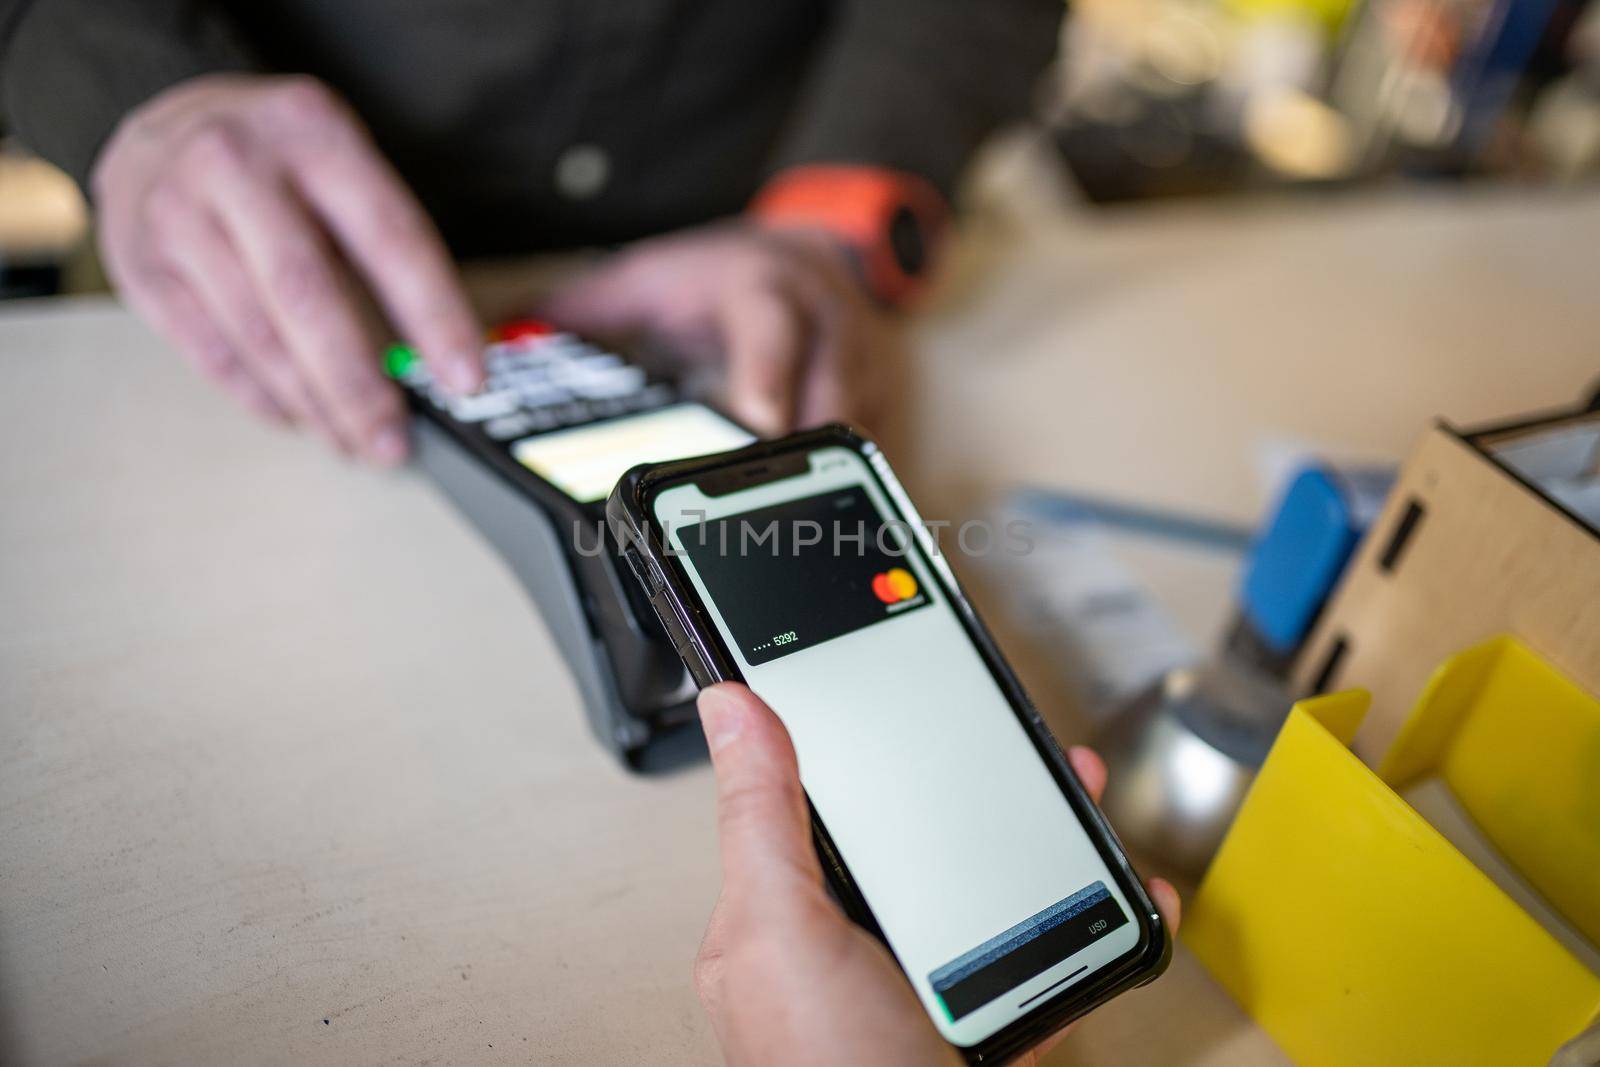 Shopping with mobile phone payment. Customer using contactless payment. Female hand paying with NFC technology on phone. Paying contactless with digital wallet. Pay by card on NFC payment terminal by Tomashevska